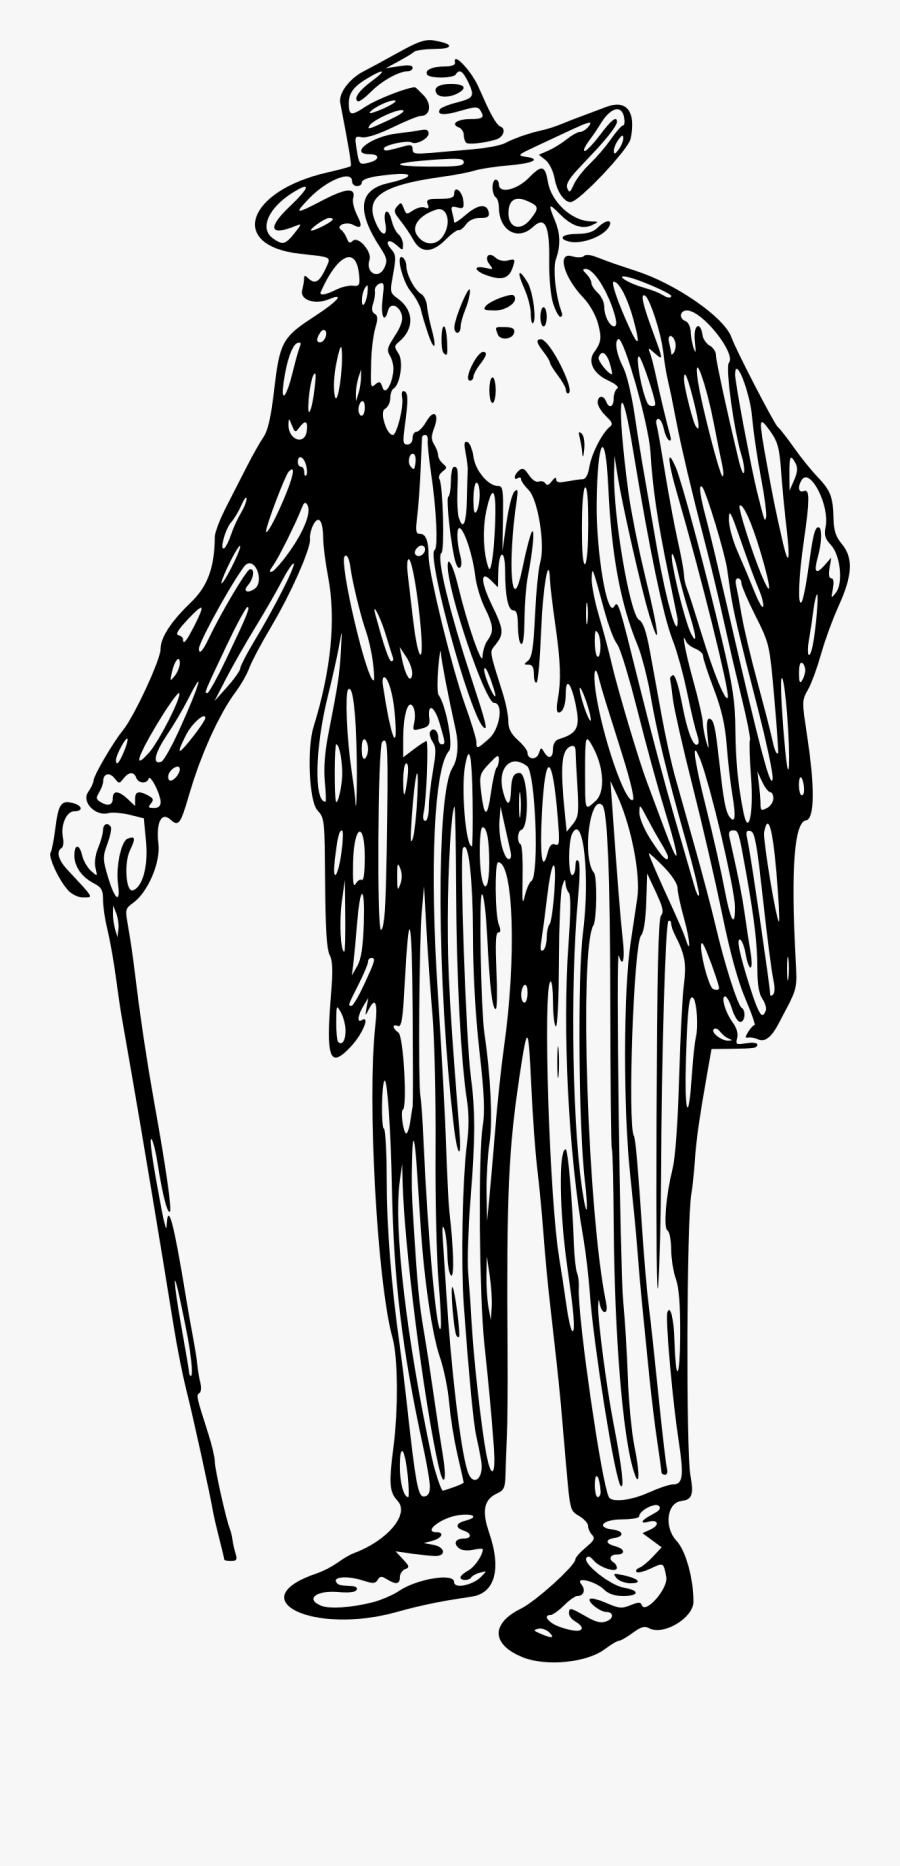 Download Old Man Clipart Black And White - Old Man With Cane Drawing, Transparent Clipart